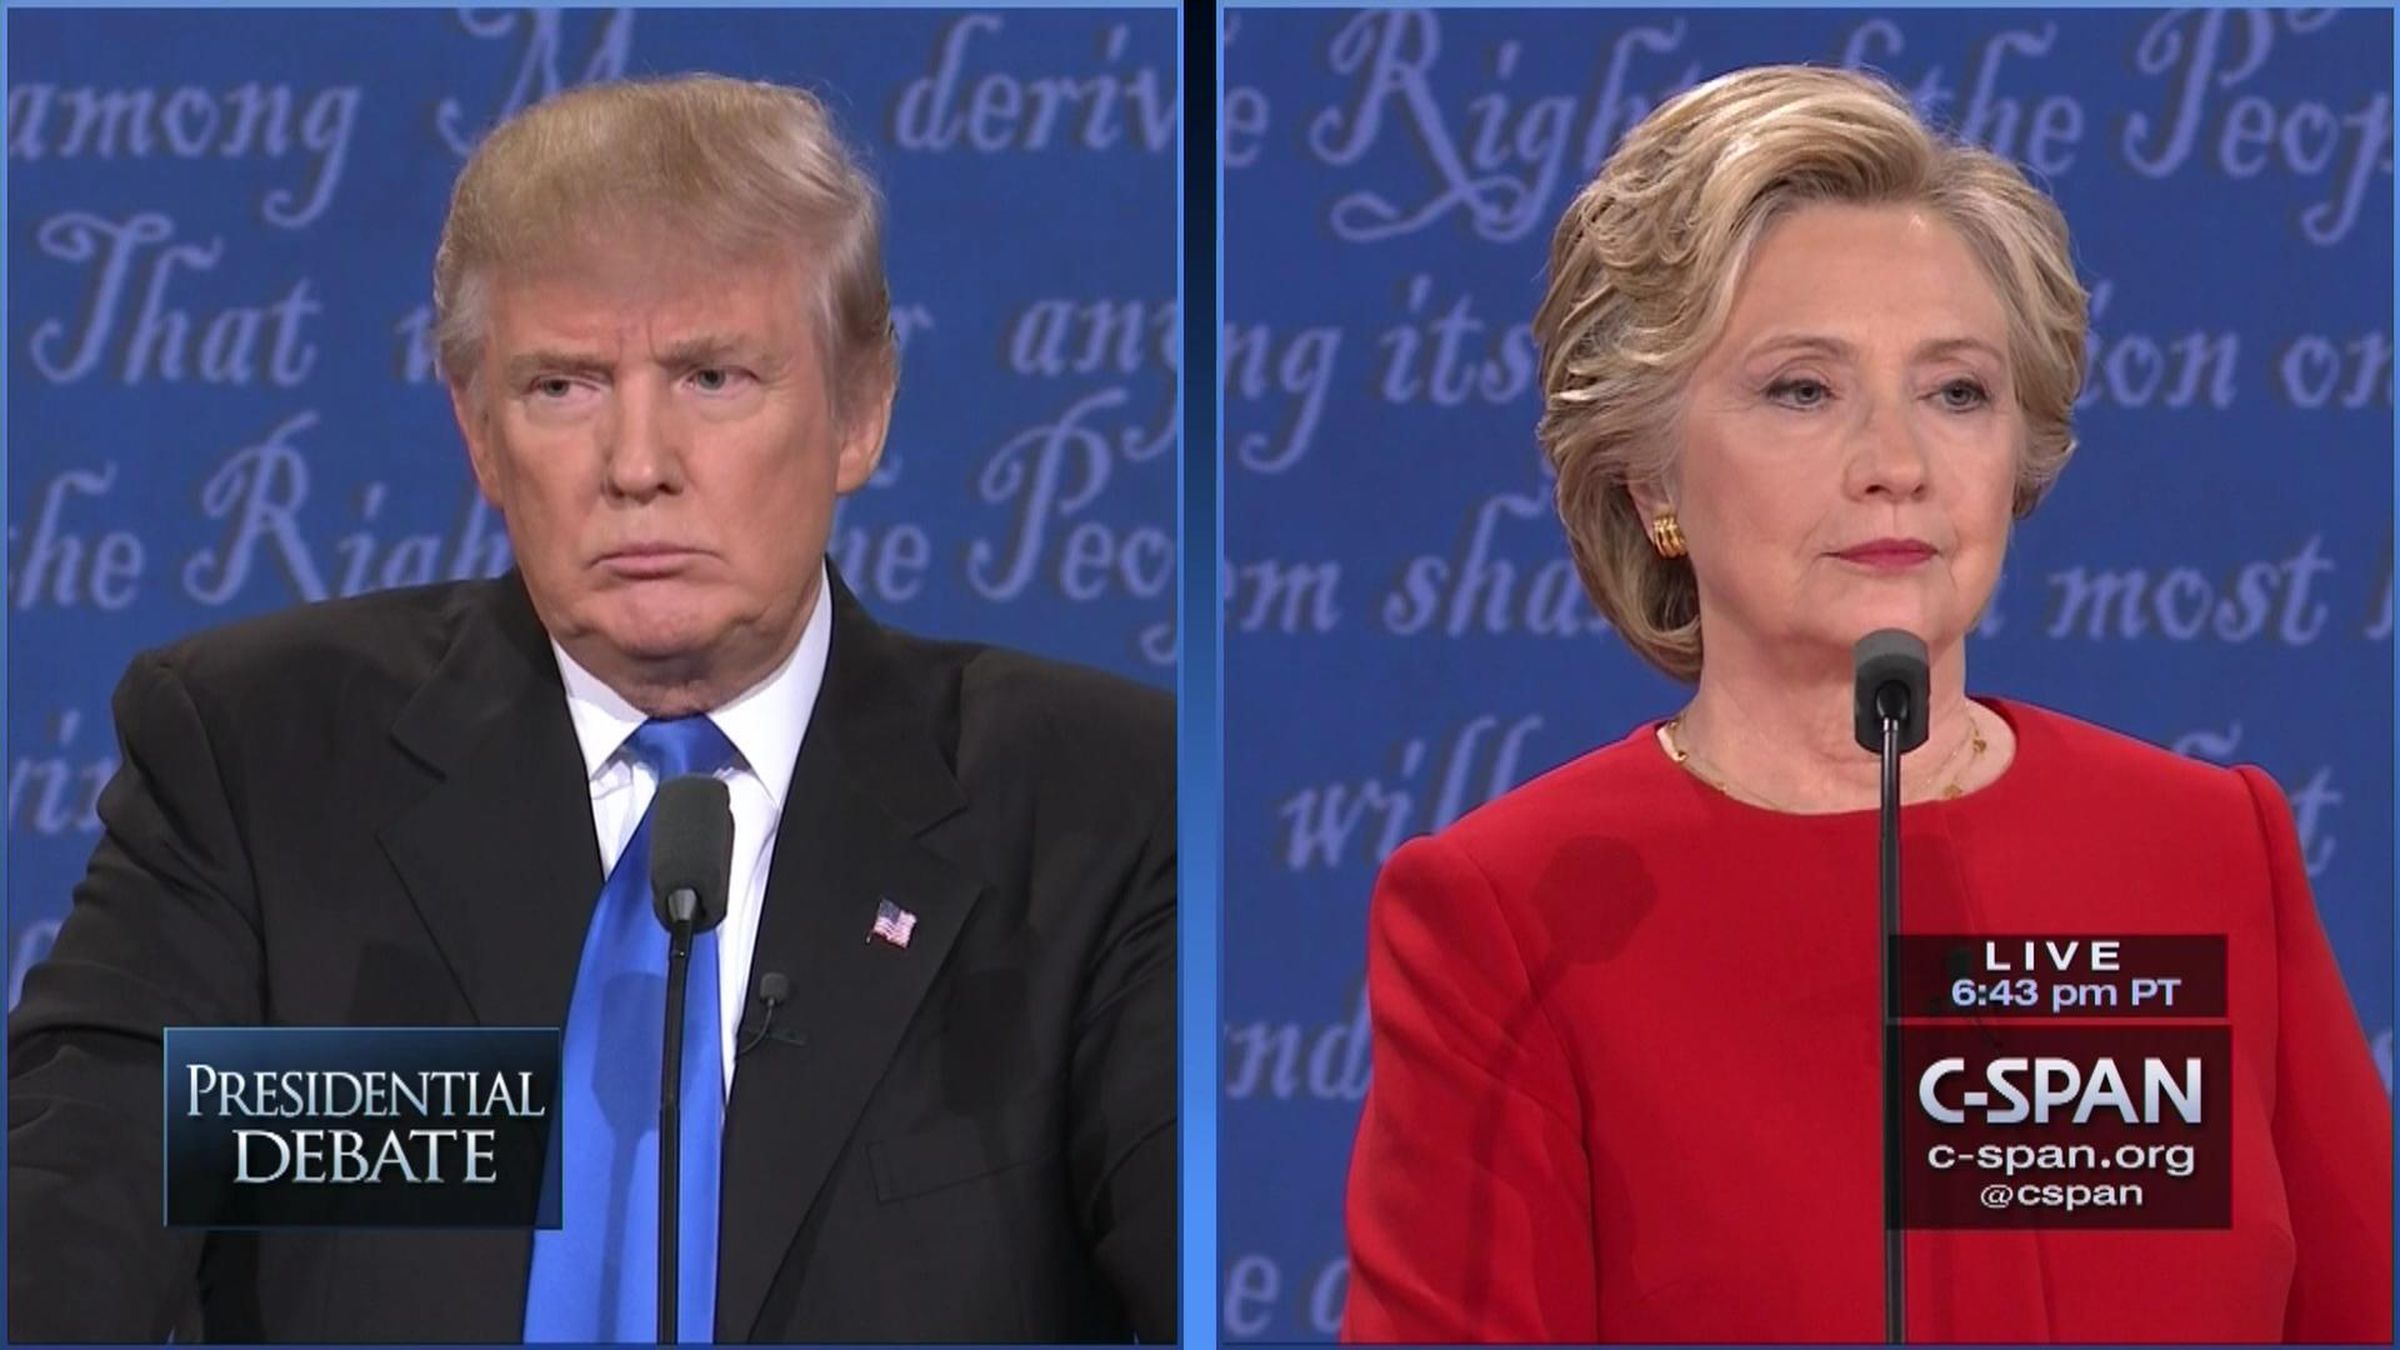 Donald Trump faces off with Hillary Clinton at the first 2016 presidential debate